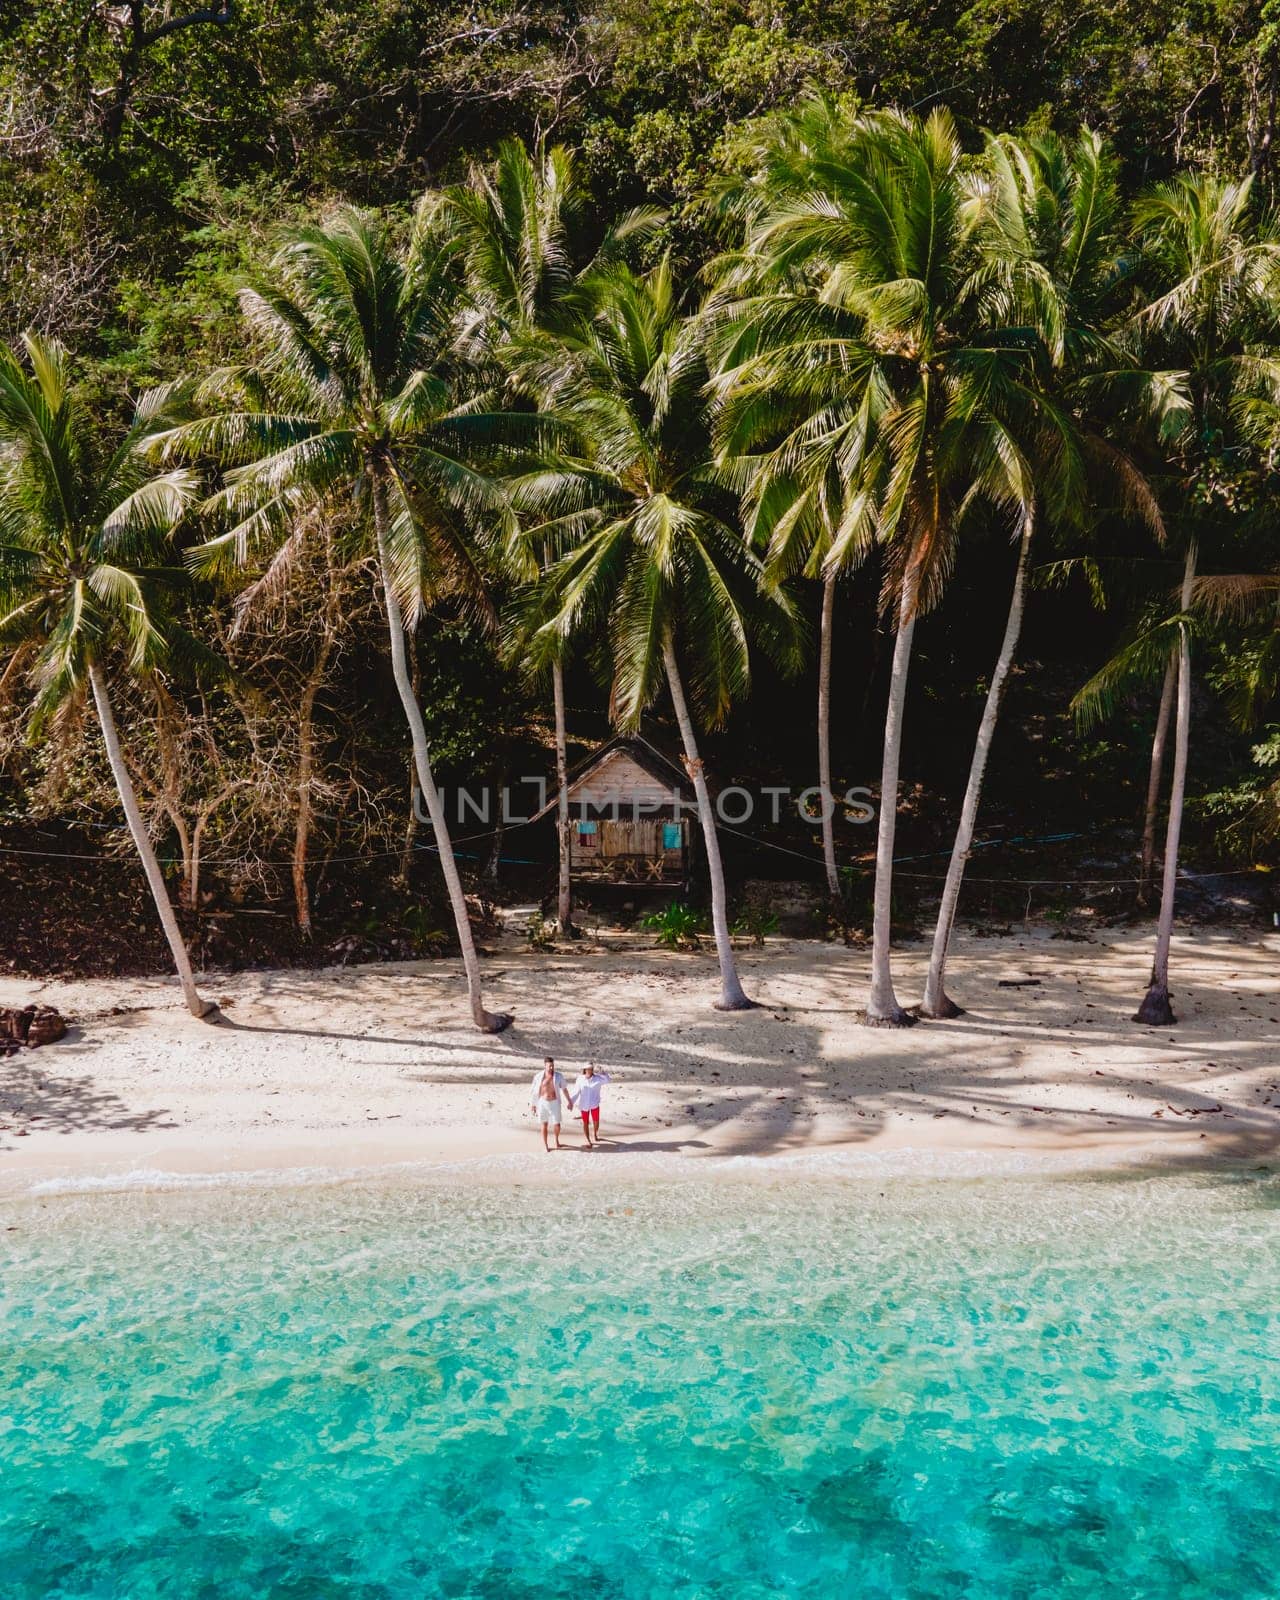 Koh Wai Island Trat Thailand, wooden bamboo hut bungalow on the beach. a young couple of men and woman on a tropical Island in Thailand with palm trees on the beach and turqouse colored ocean